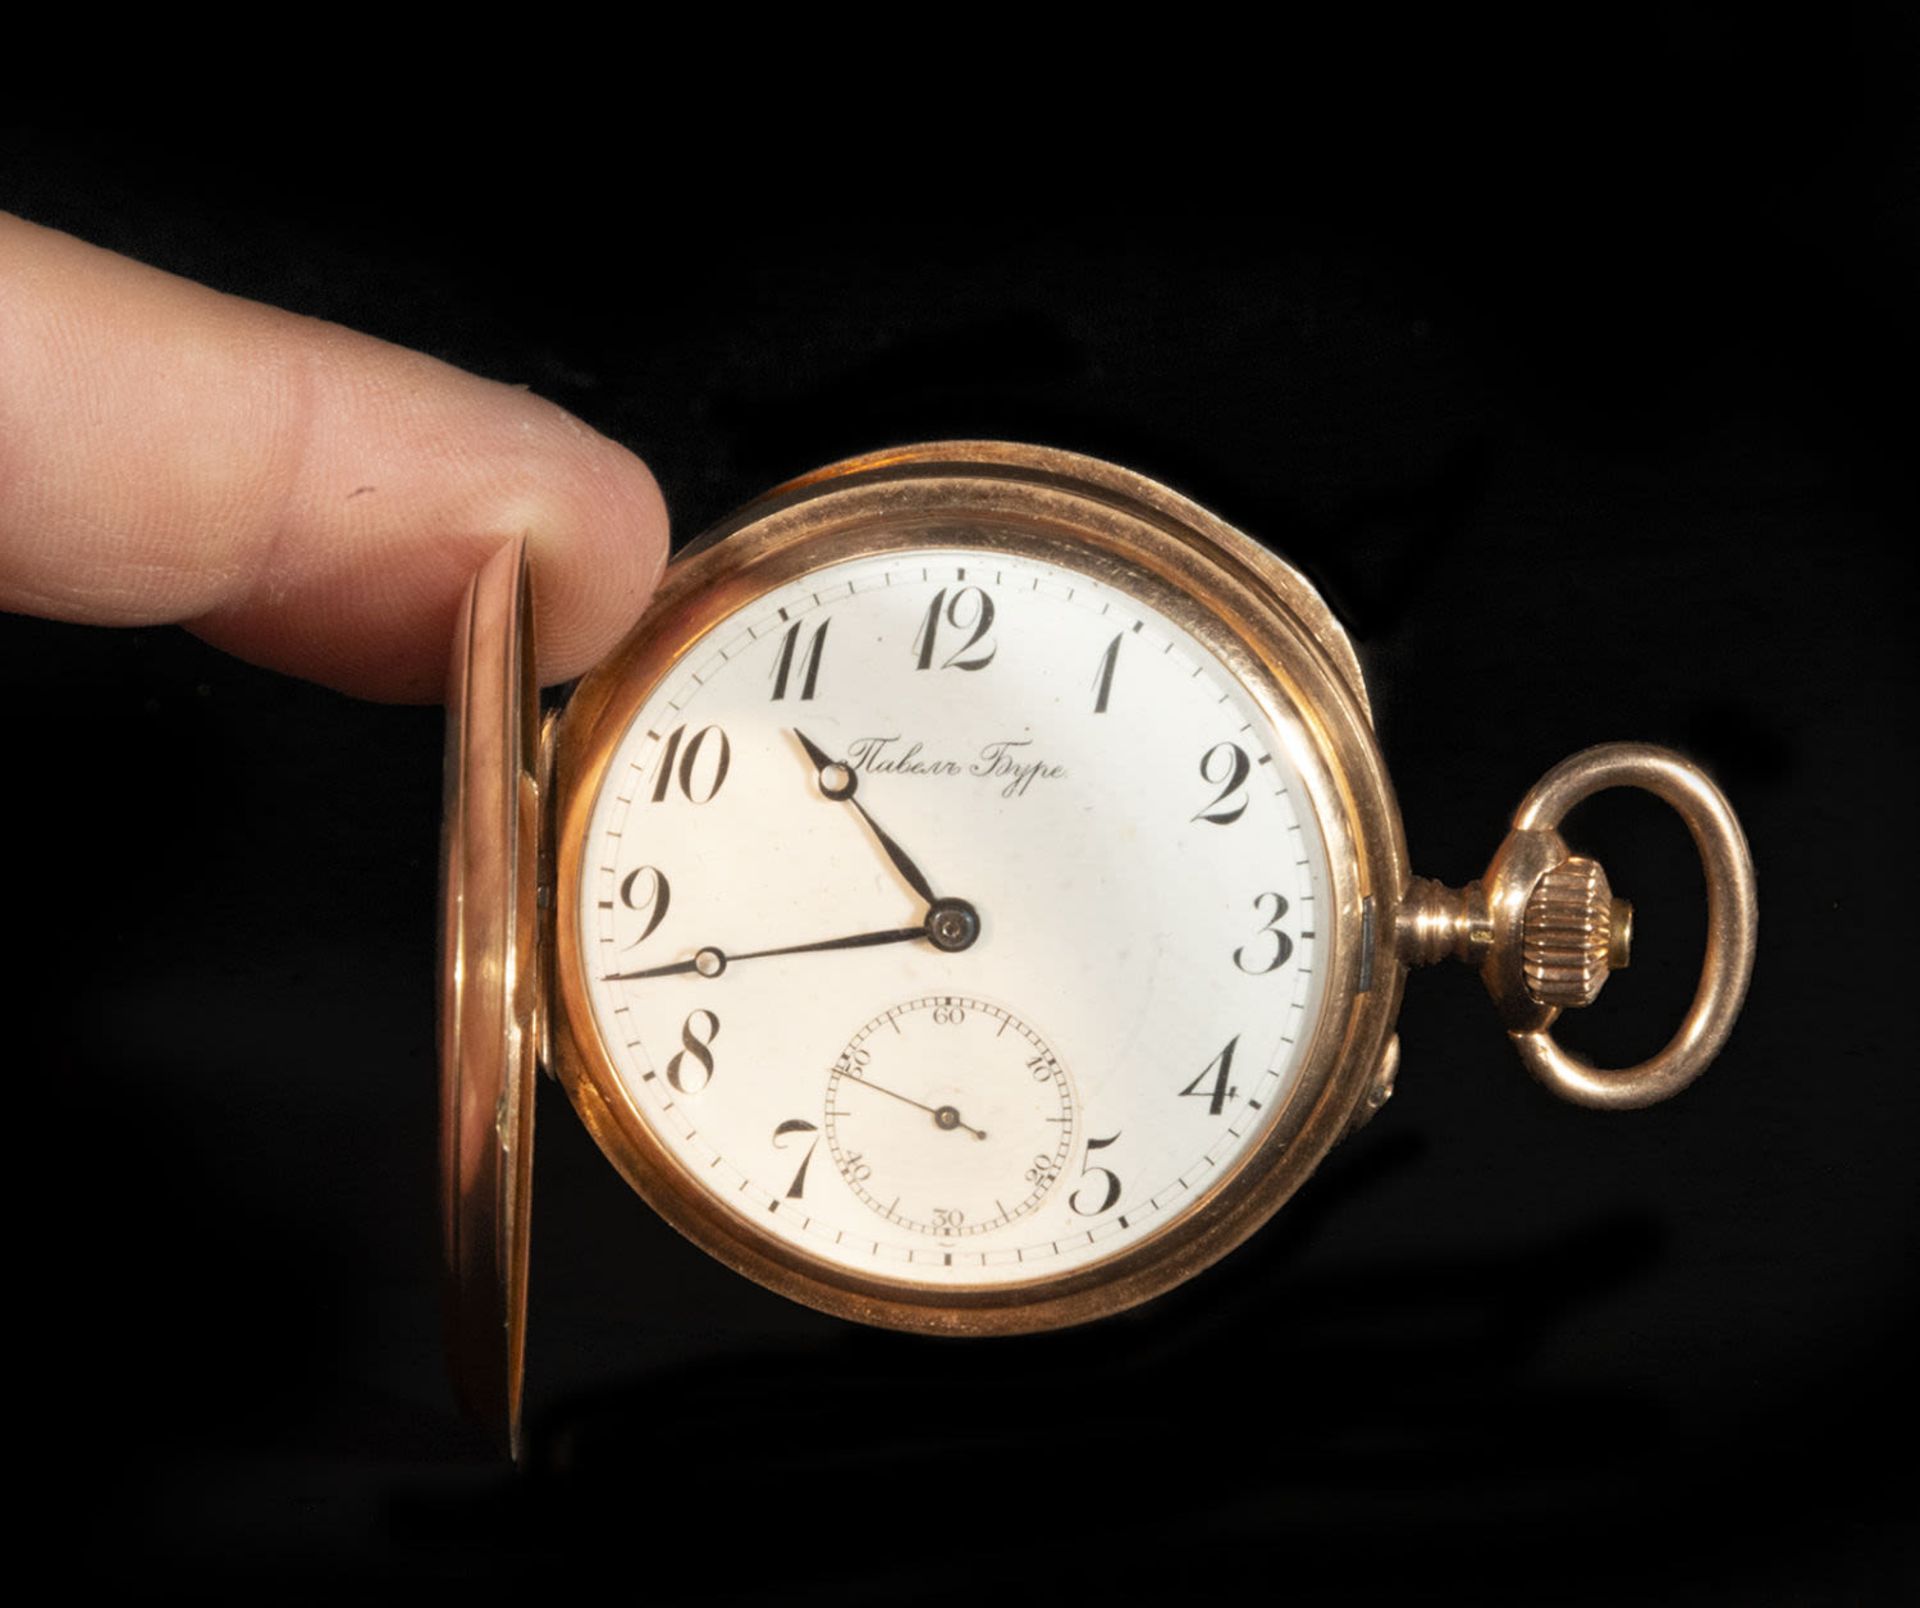 Elegant Paul Buhre/Faber Type pocket watch with 14k gold case from the year 1910-1911, .583 hallmark